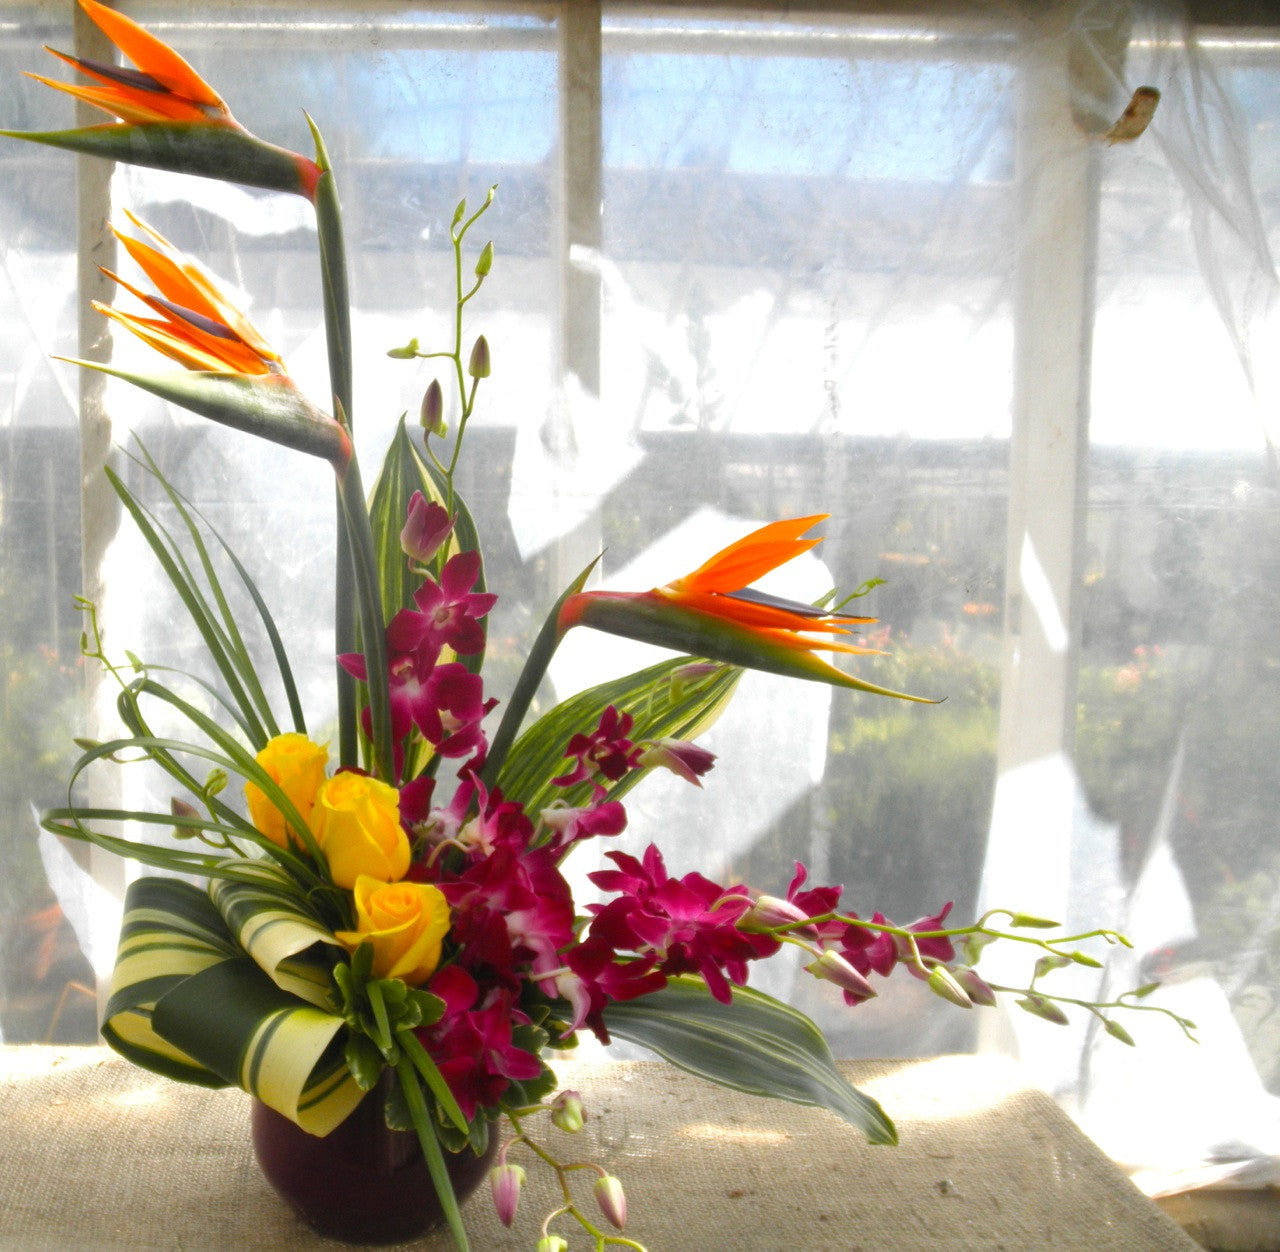 Floral arrangment by Michler's Florist with birds of paradise and orchids